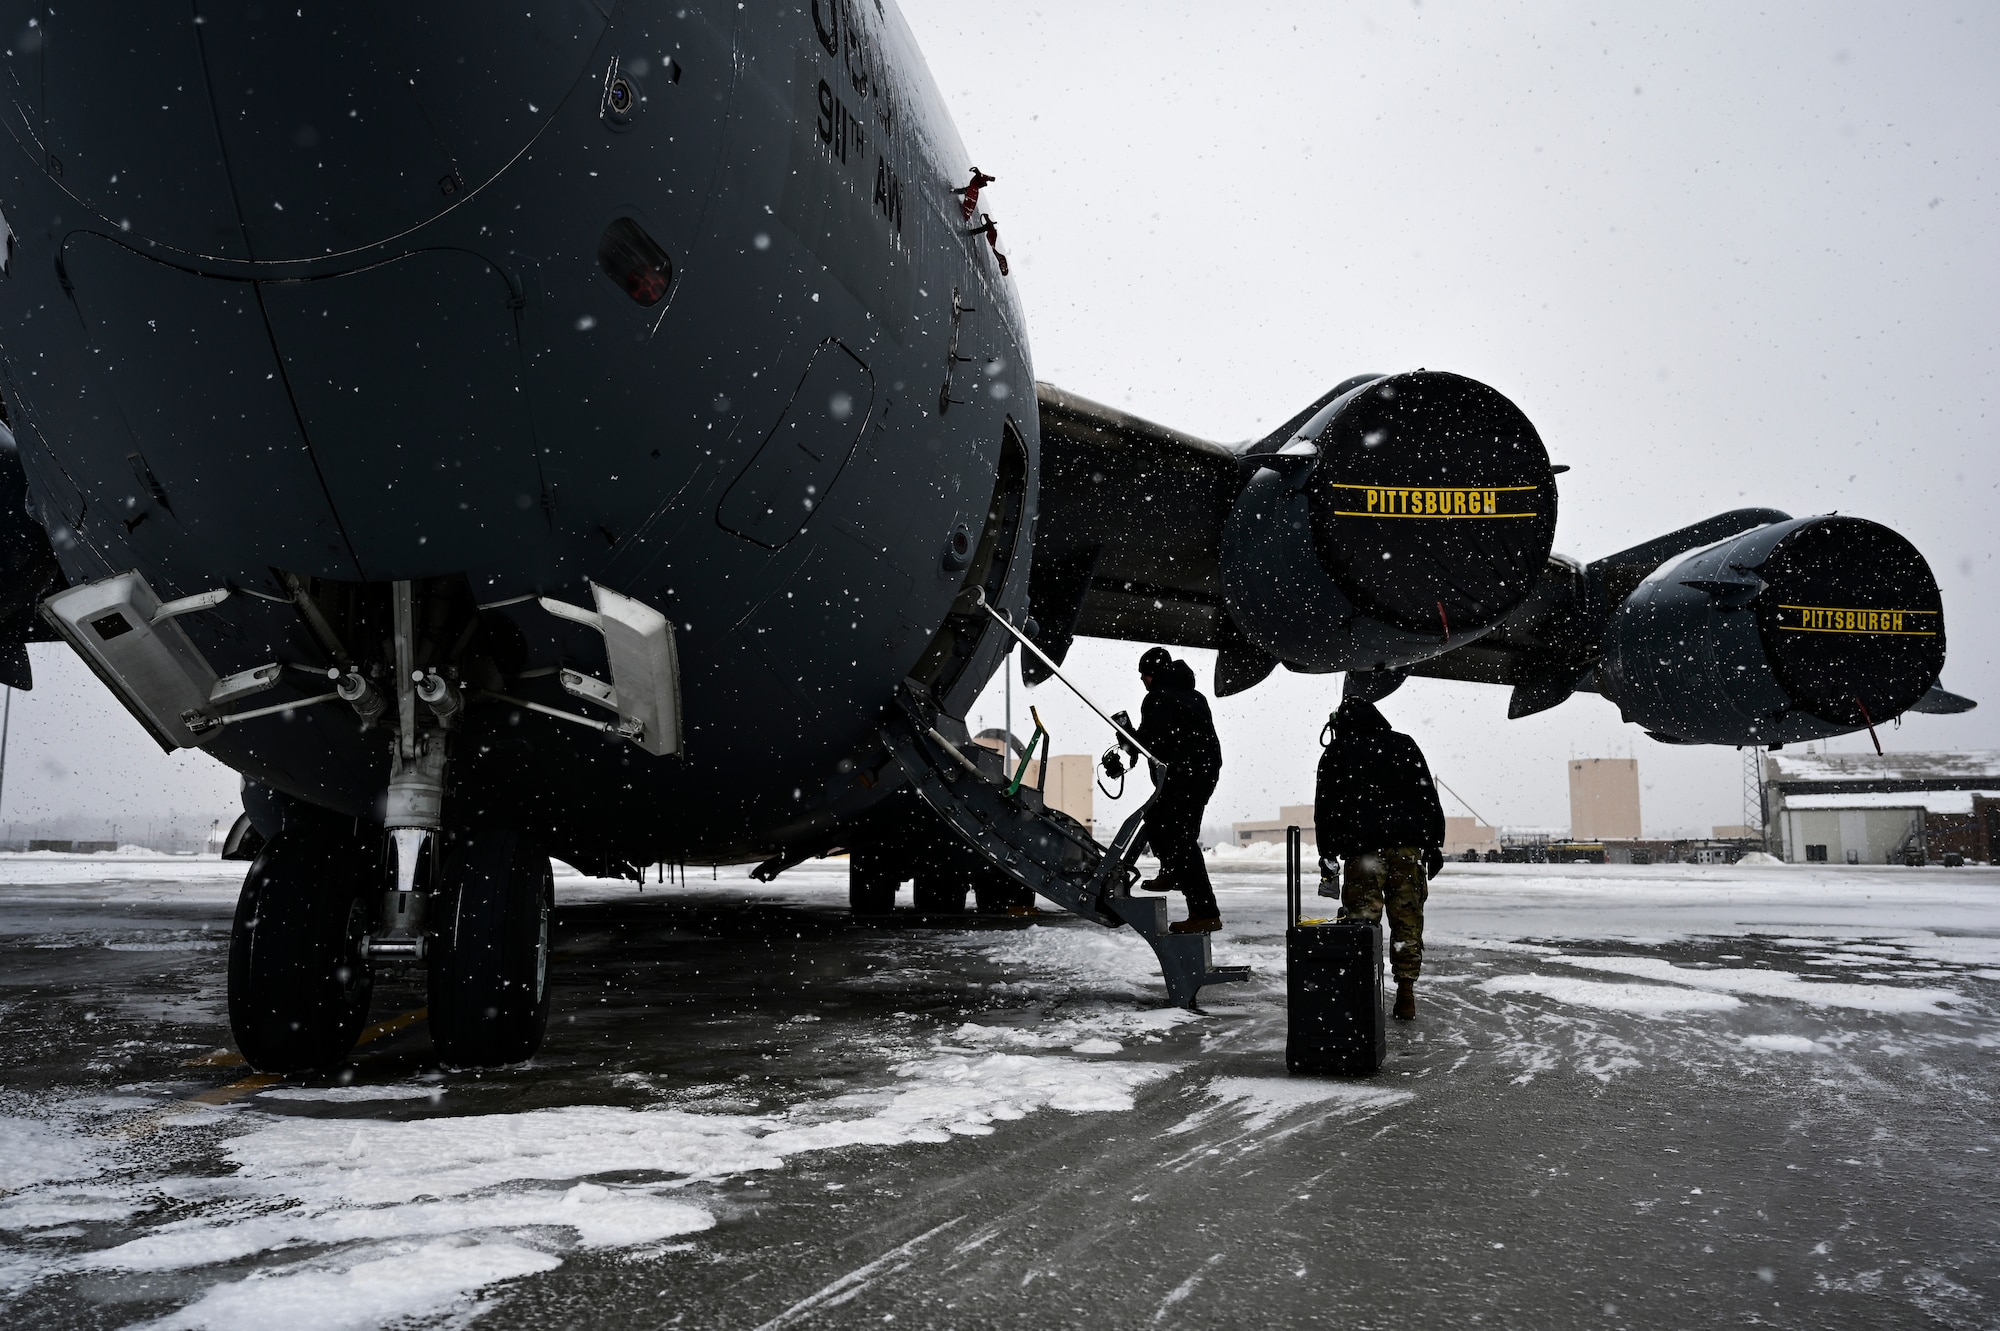 Airmen assigned to the 911th Aircraft Maintenance Squadron prepare to conduct routine maintenance on a C-17 Globemaster III at the Pittsburgh International Airport Air Reserve Station, Pennsylvania, Feb. 16, 2021.